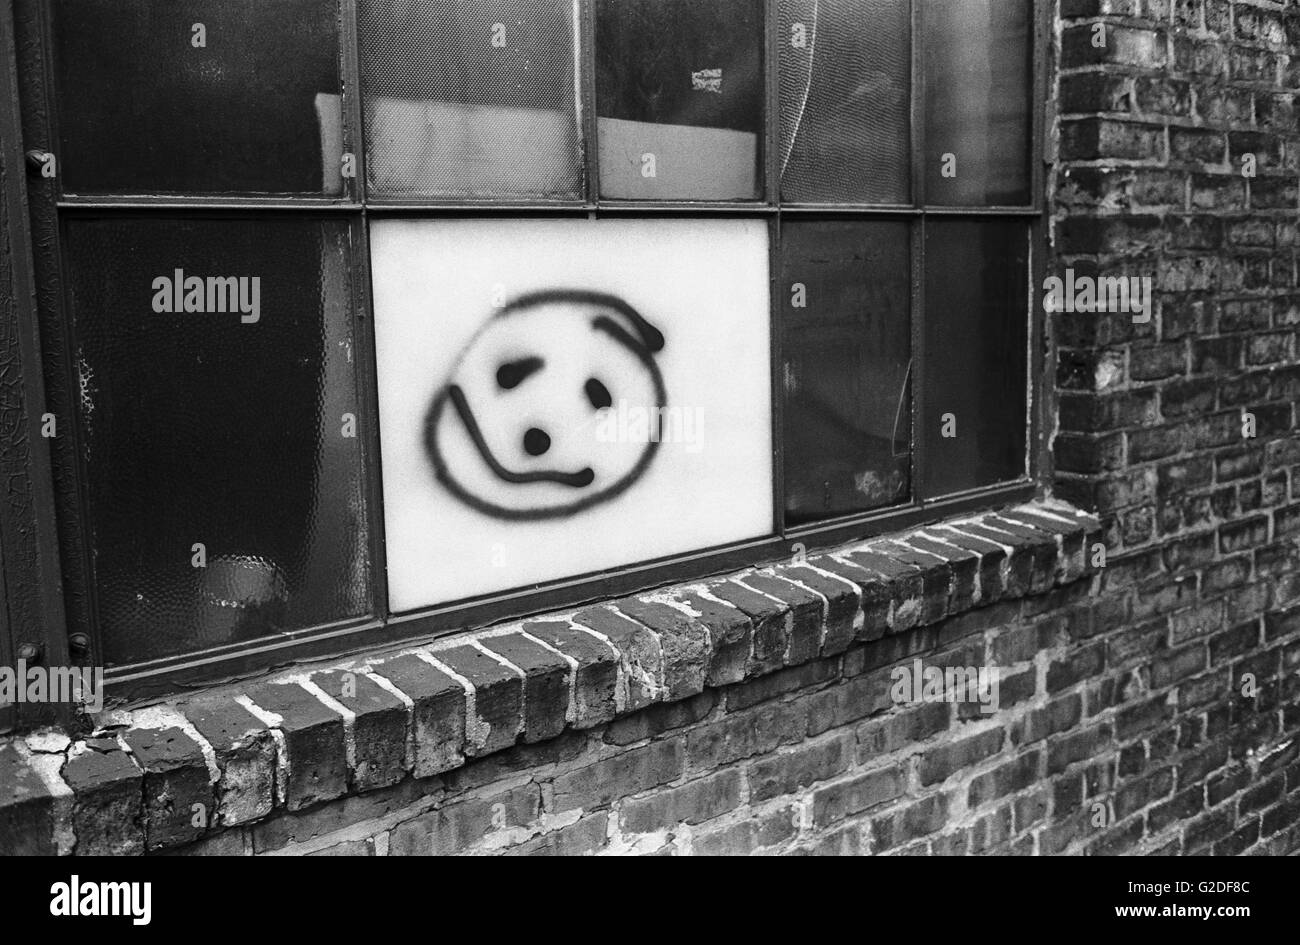 Smiley Face Painted on Urban Window Stock Photo